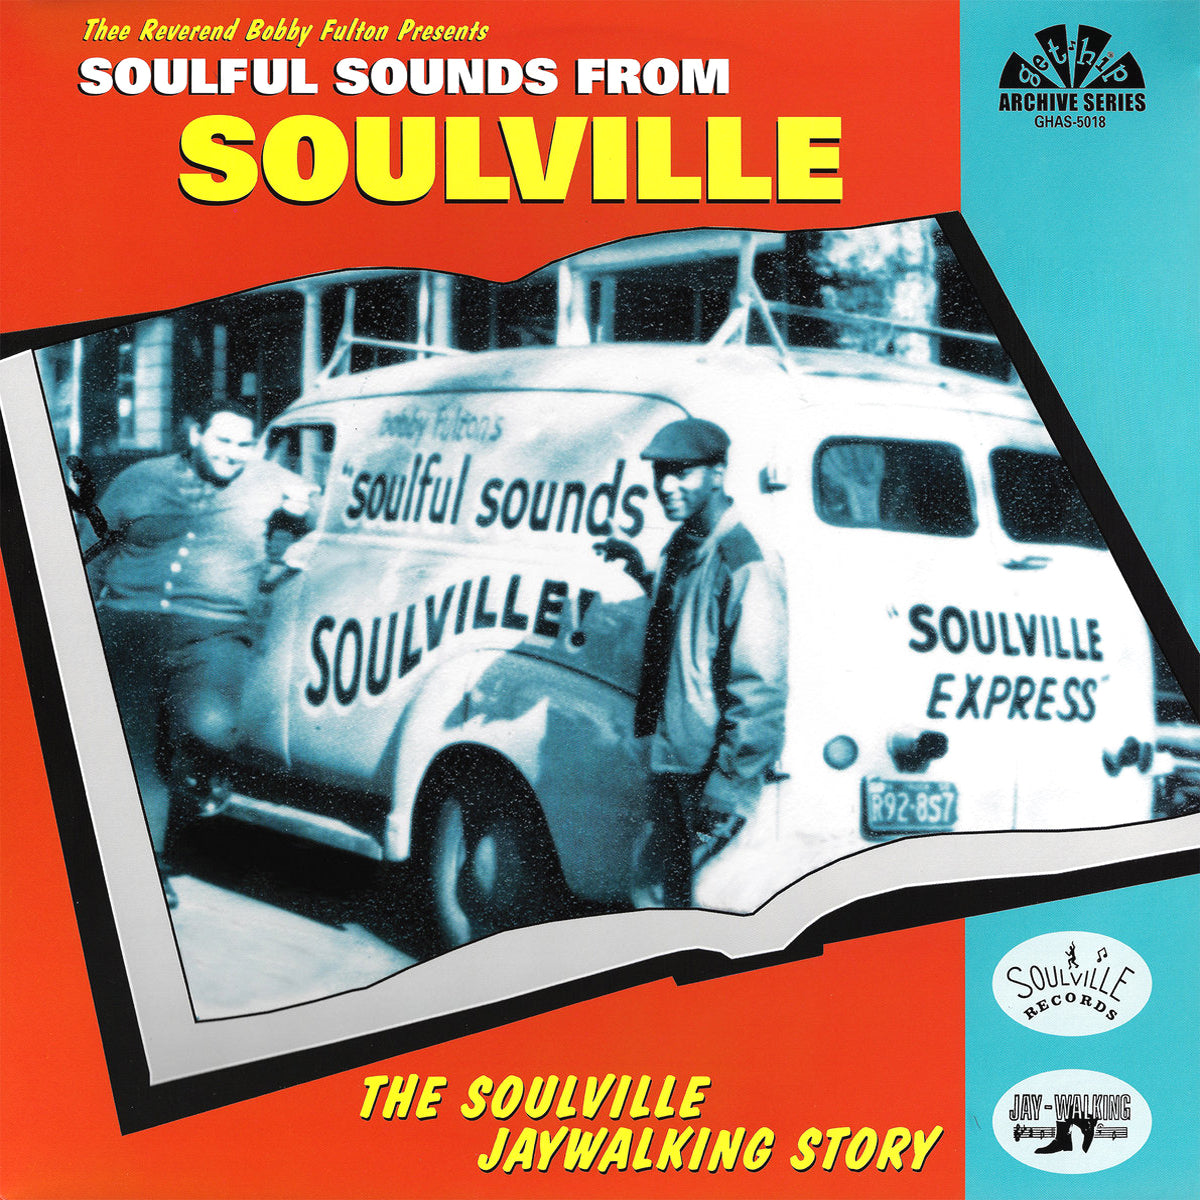 V/A- Soulful Sounds From Soulville CD ~REISSUE!